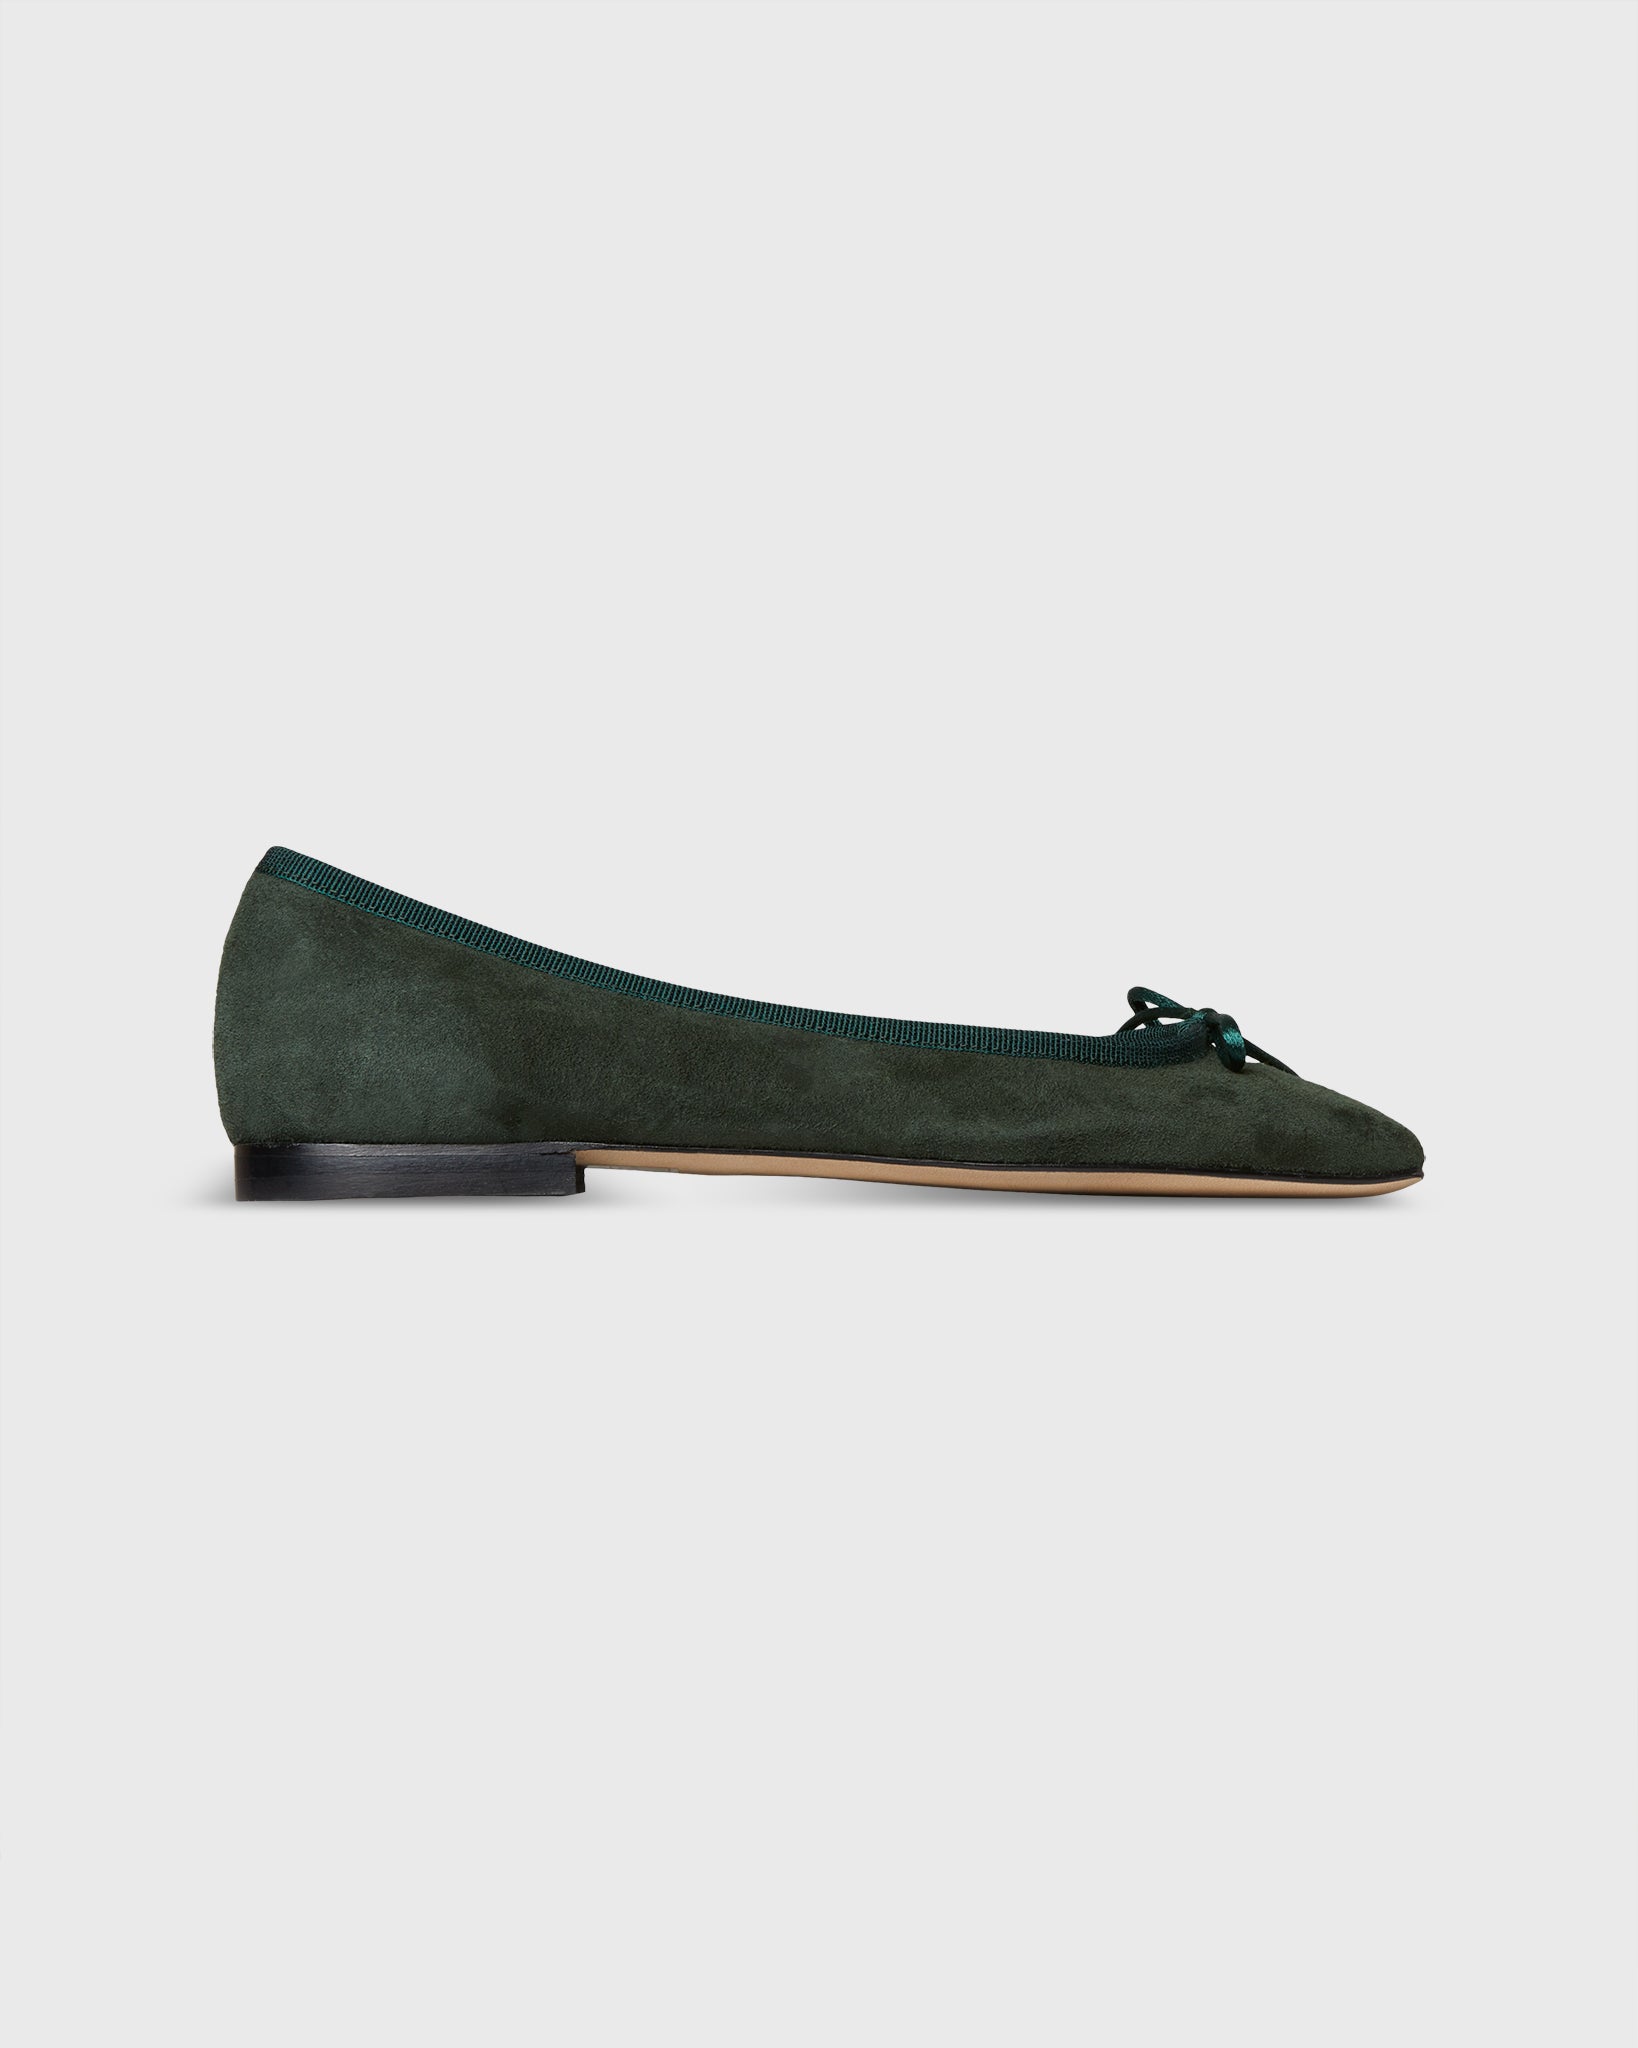 Square-Toe Ballet Flat in Forest Suede